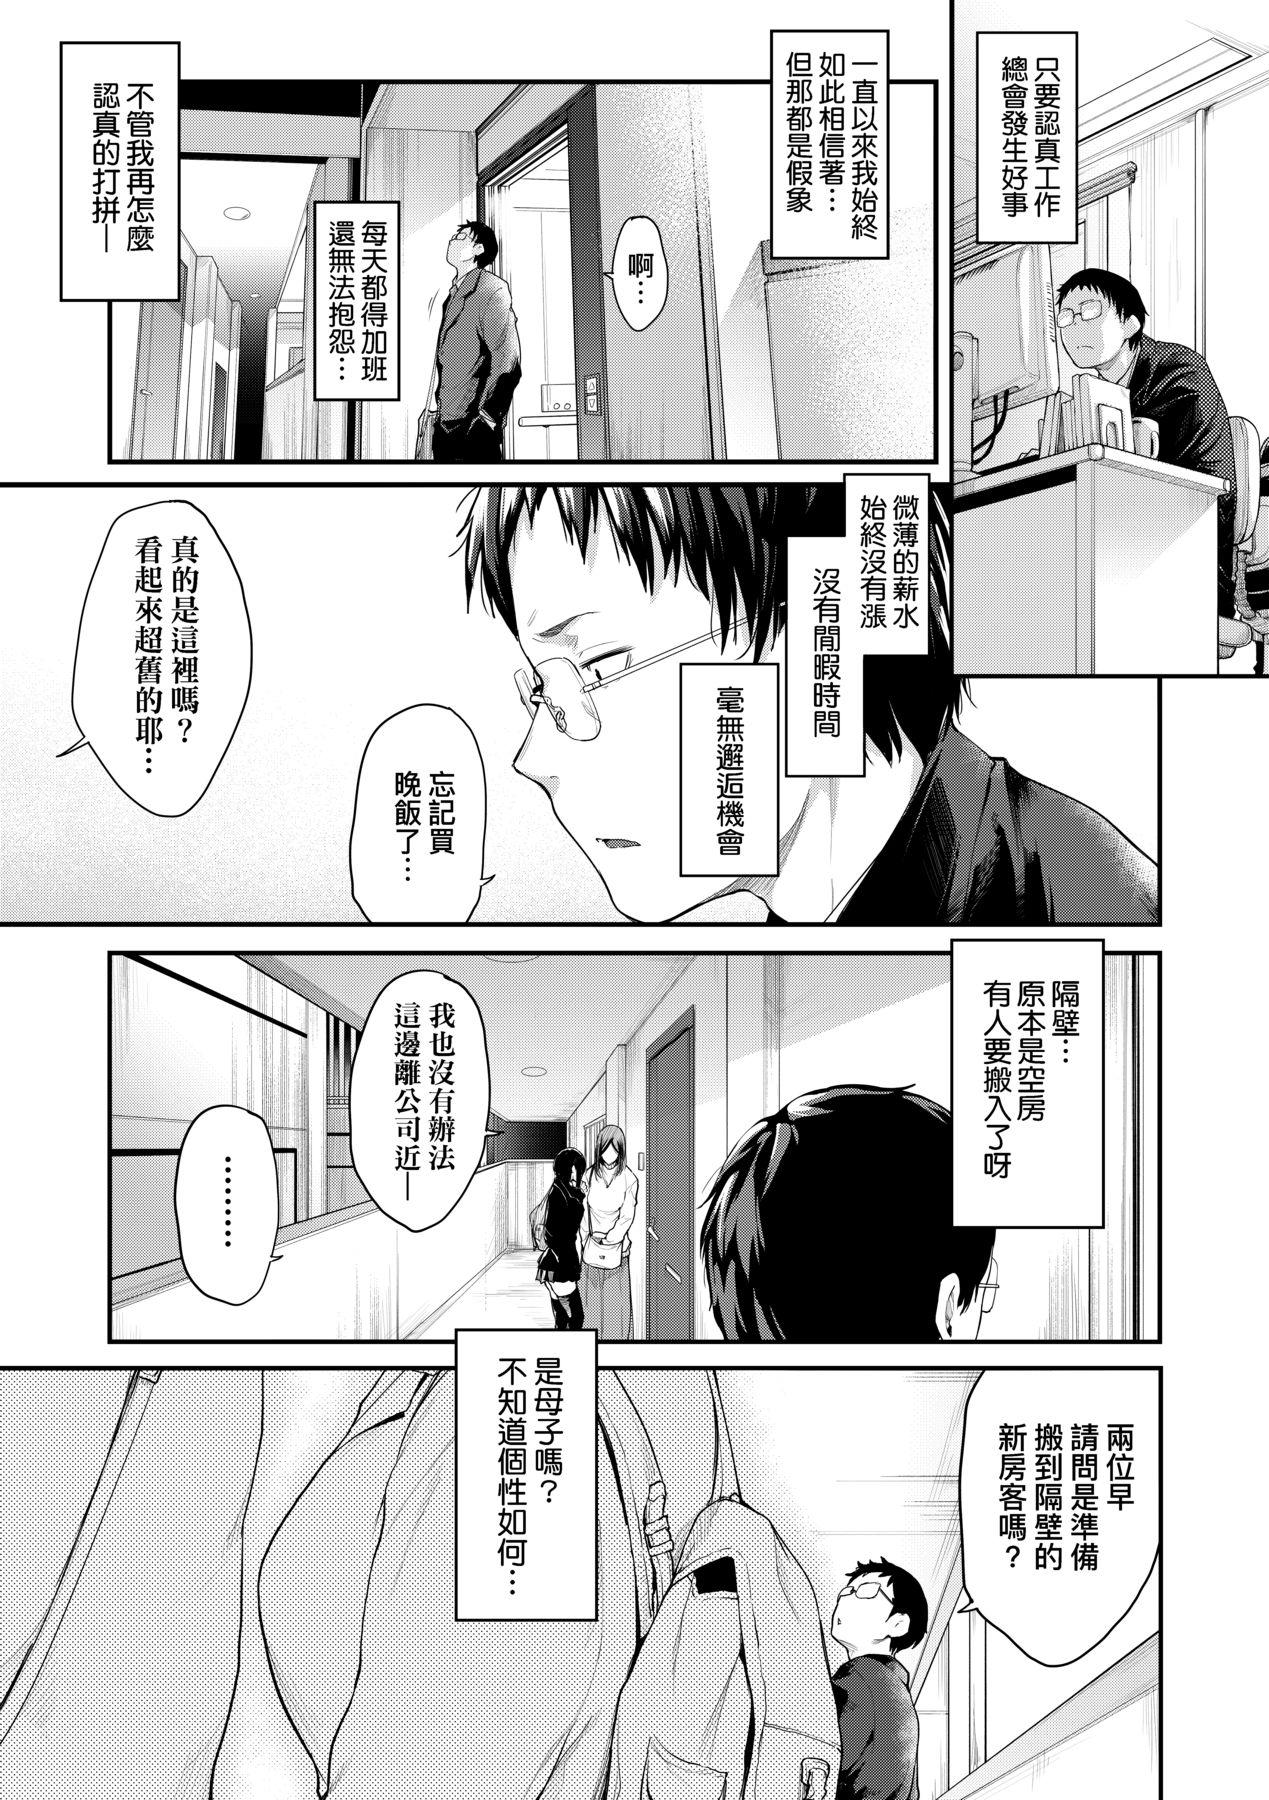 Stretching Chichi to Megane to Etc - Boobs, glasses and etc... | 乳与眼镜与其他性癖 Solo Girl - Page 10